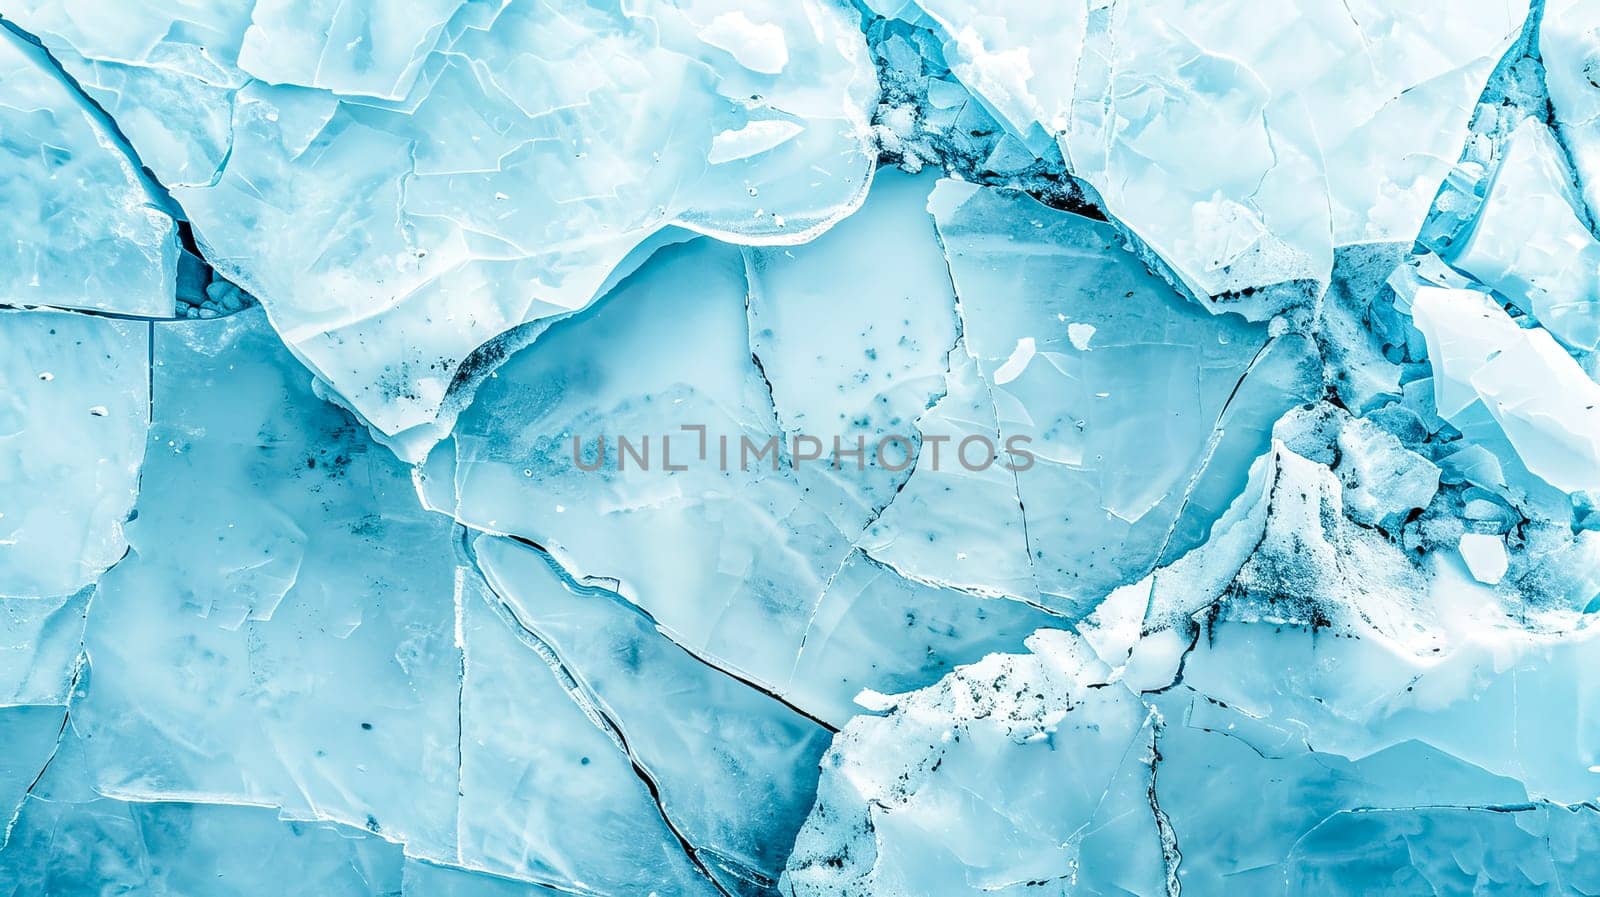 High-detail aerial view of cracked ice giving an abstract natural background